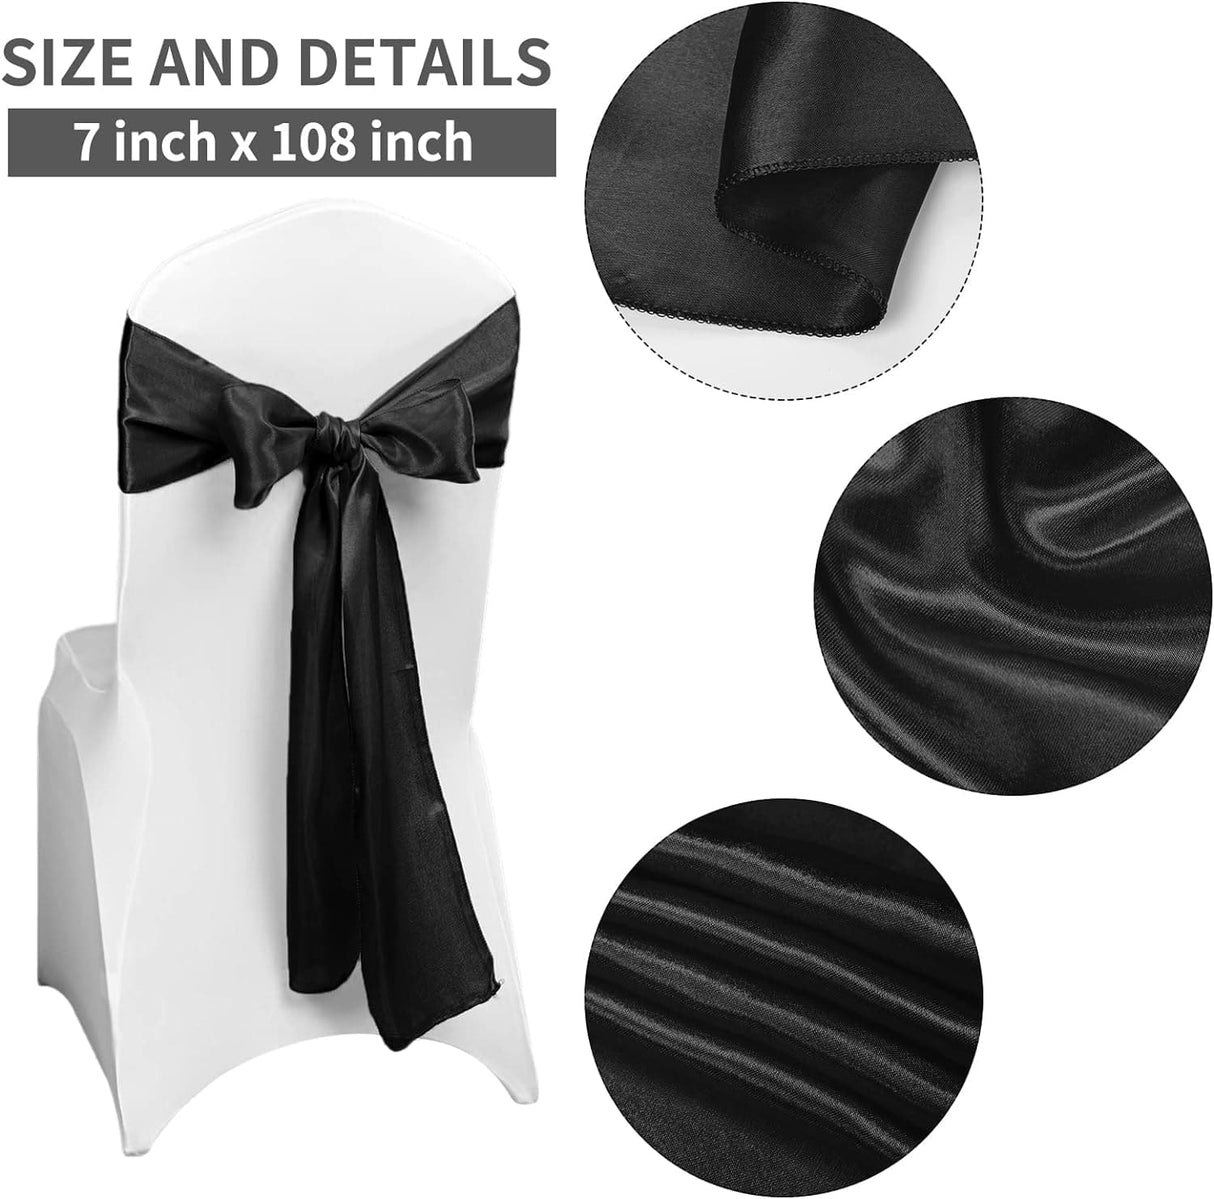 50 PCS Satin Chair Sash Chair Decorative Bow Designed Chair Cover Chair Sashes for Thanksgiving Wedding Banquet Party Home Kitchen Decoration